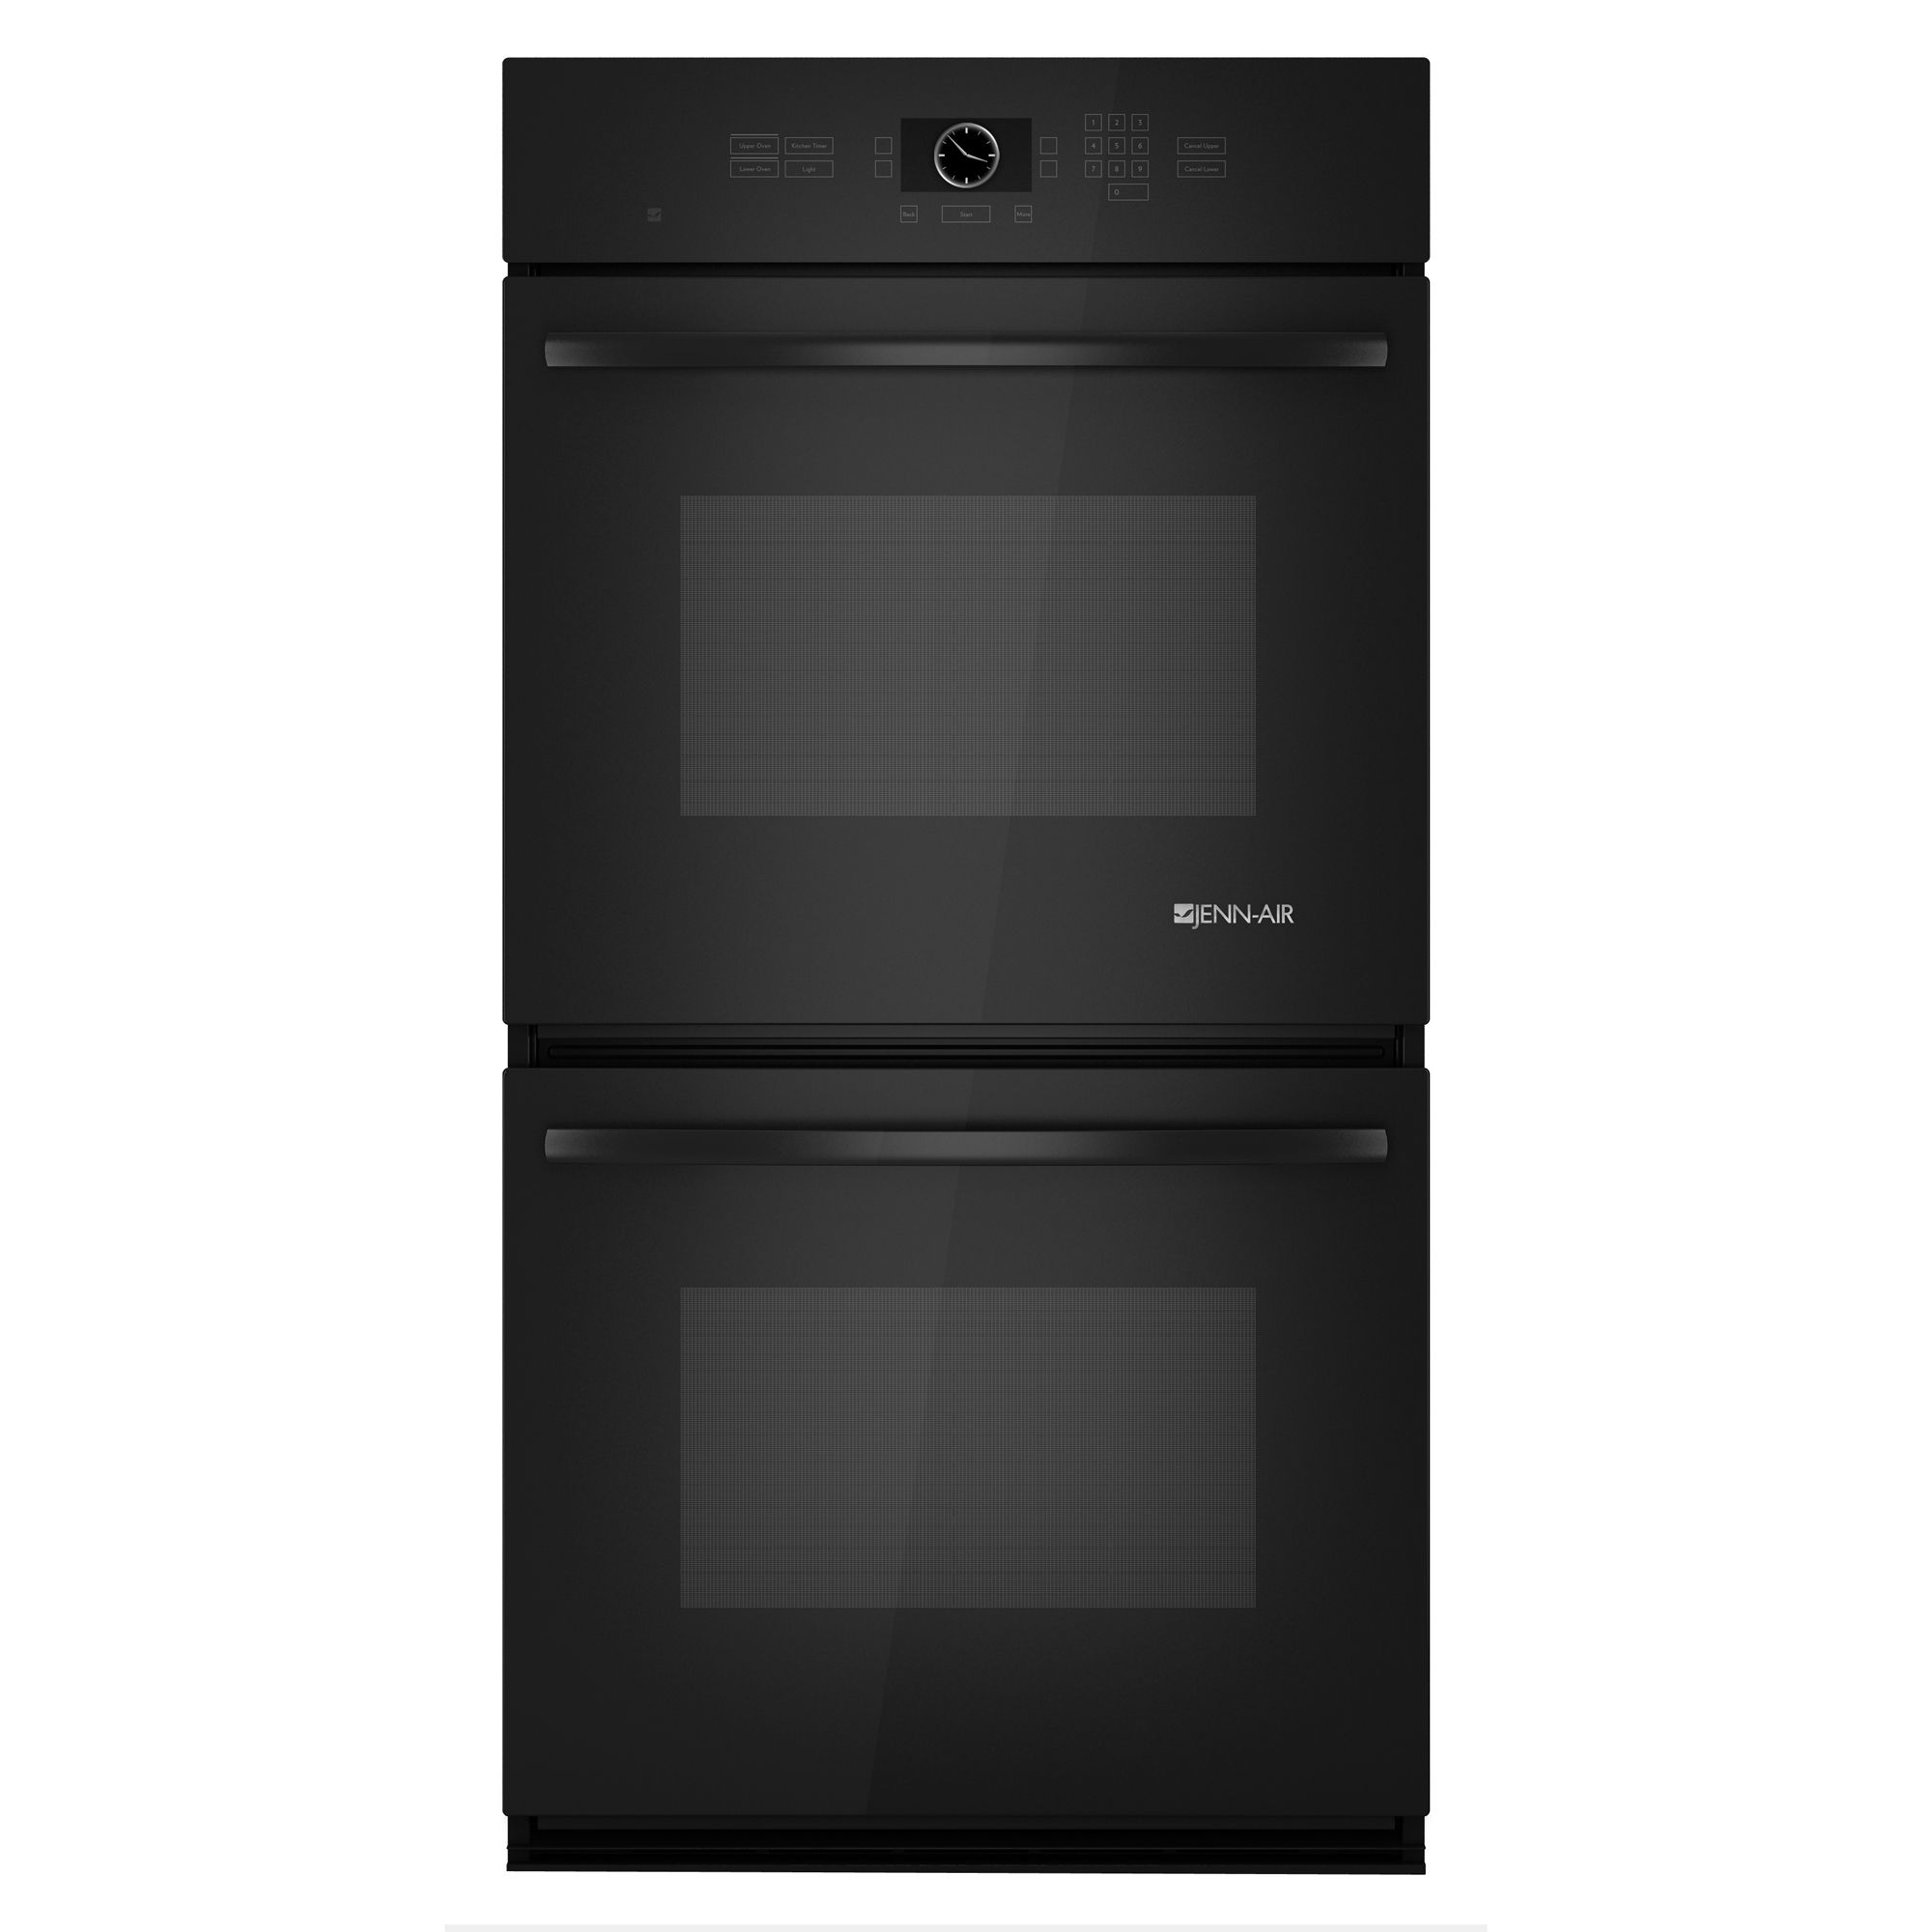 27" Built-In Double Wall Oven logo